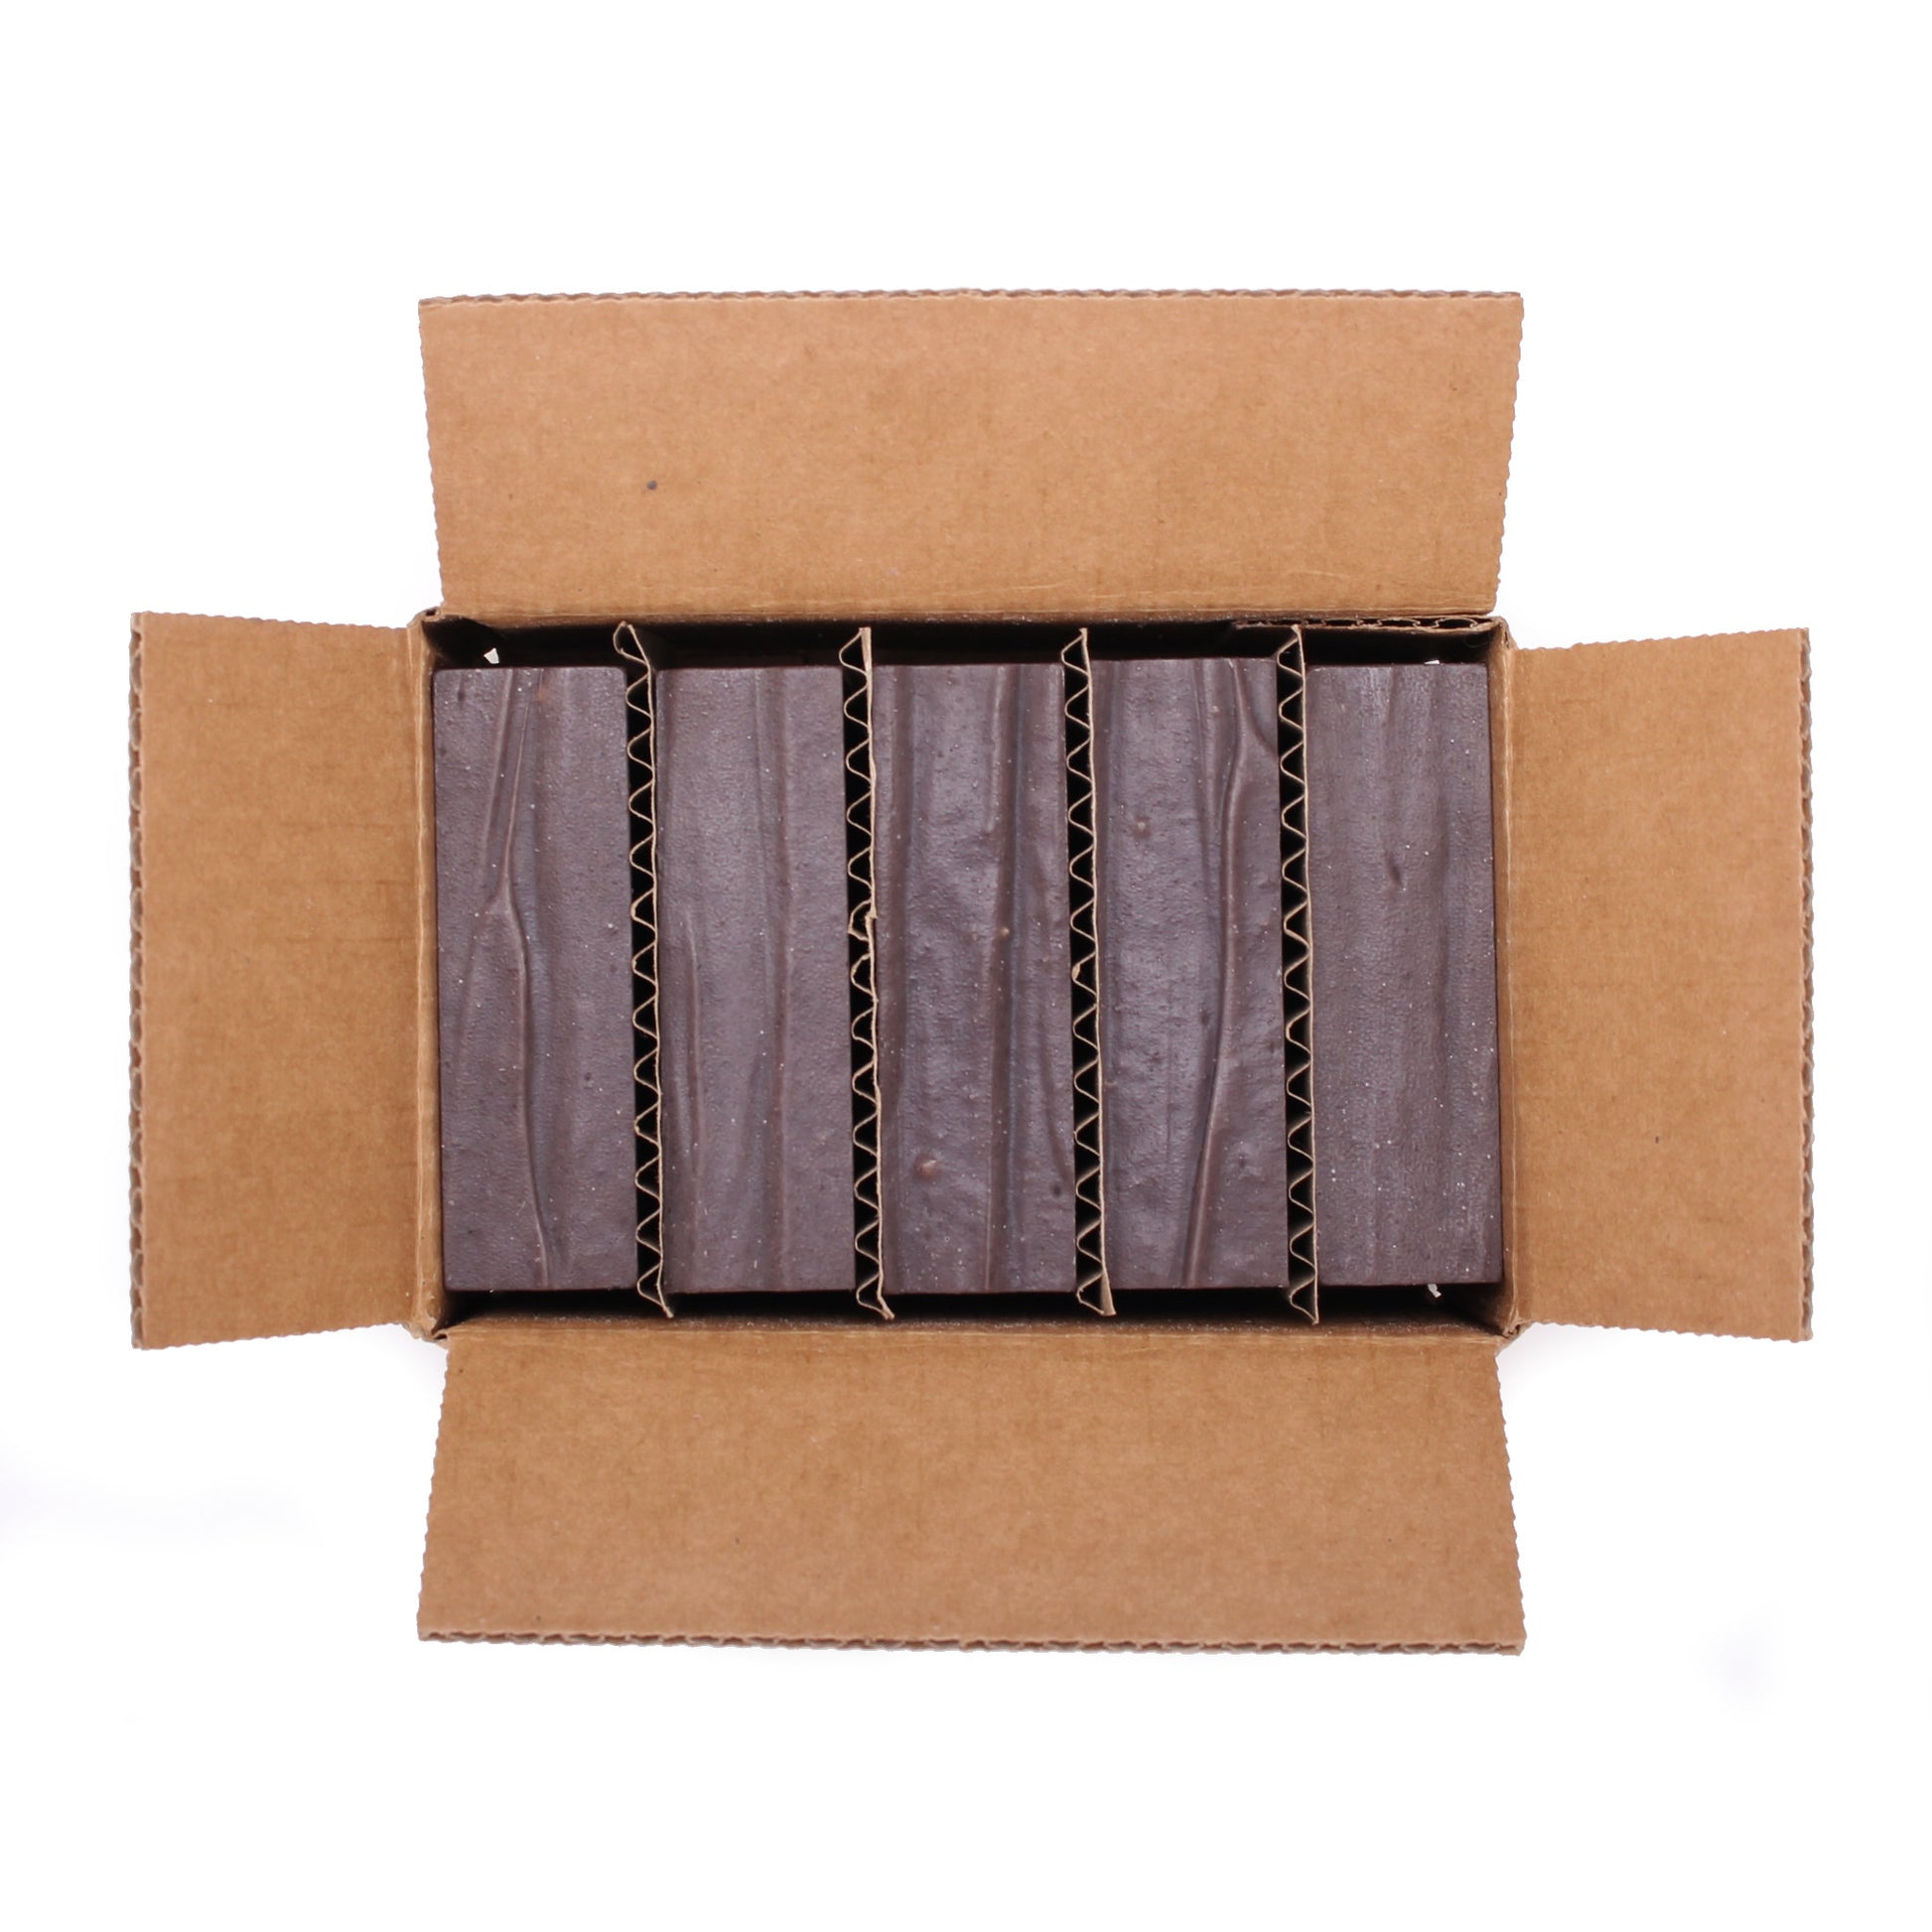 Five naked Black Cricket lavender essential oil organic bar soap from ground Soap.